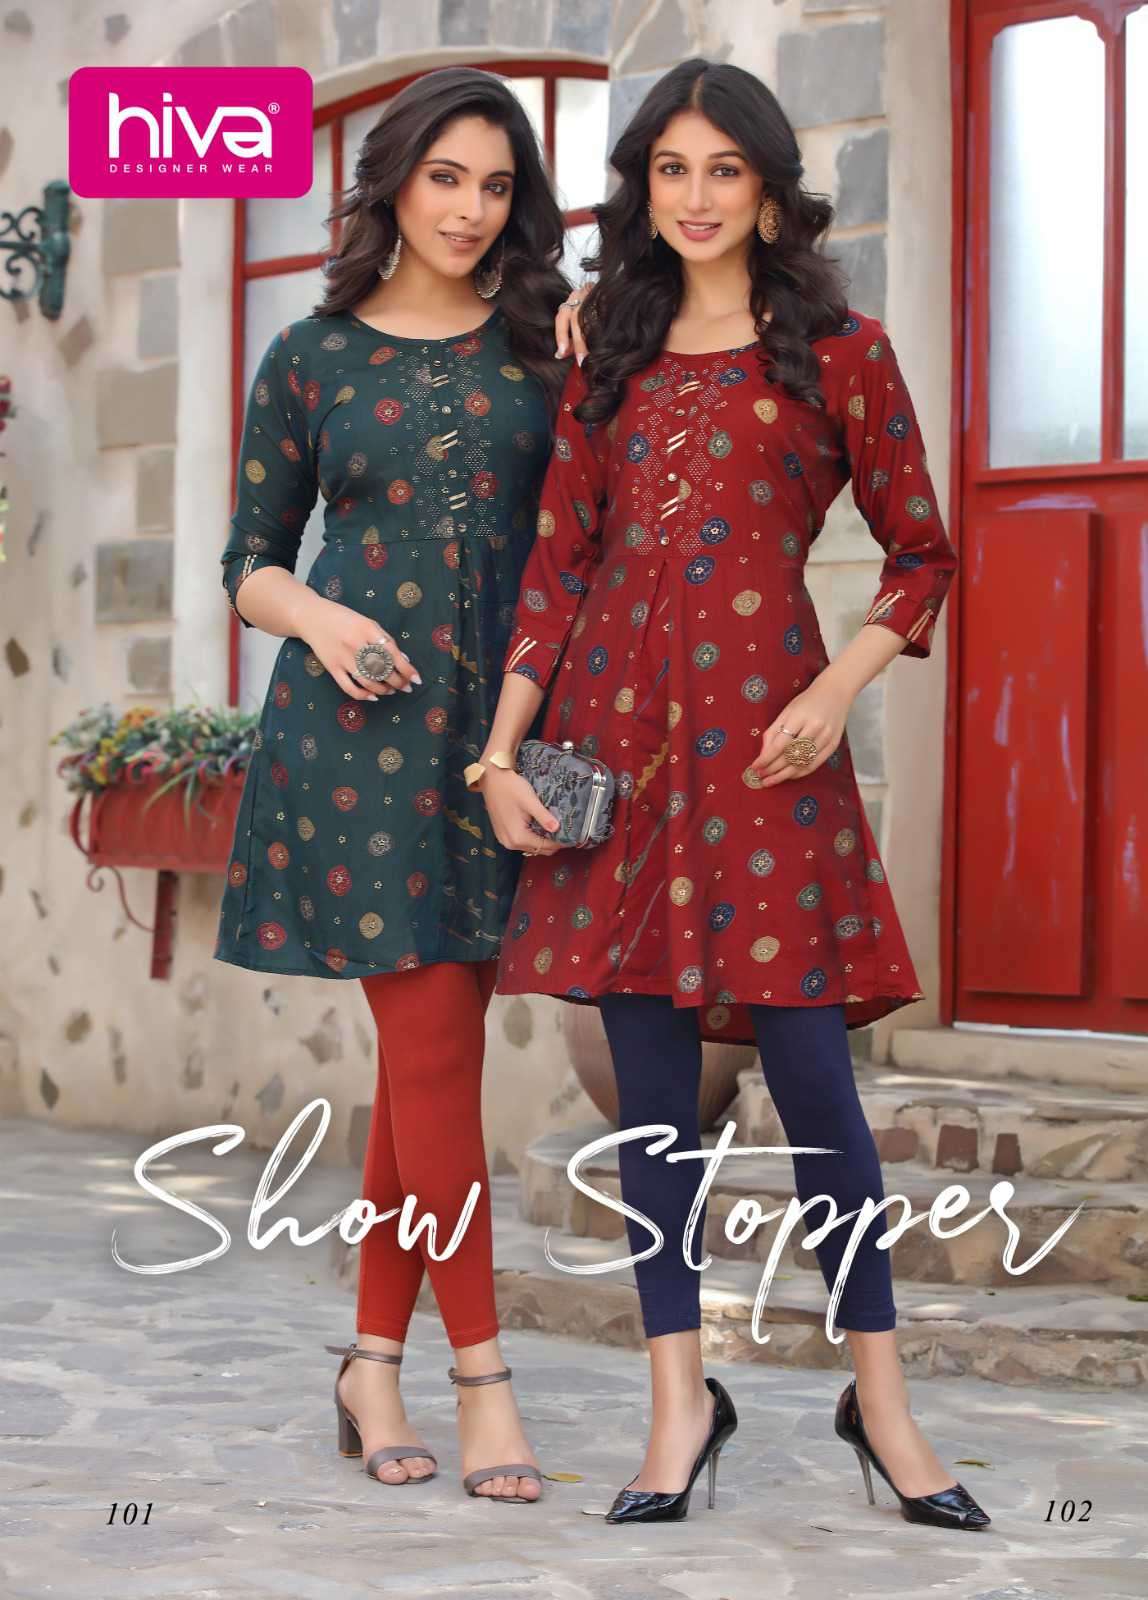 Hiva Show Stopper Western Wear Frock Style Tunic Ladies Collection